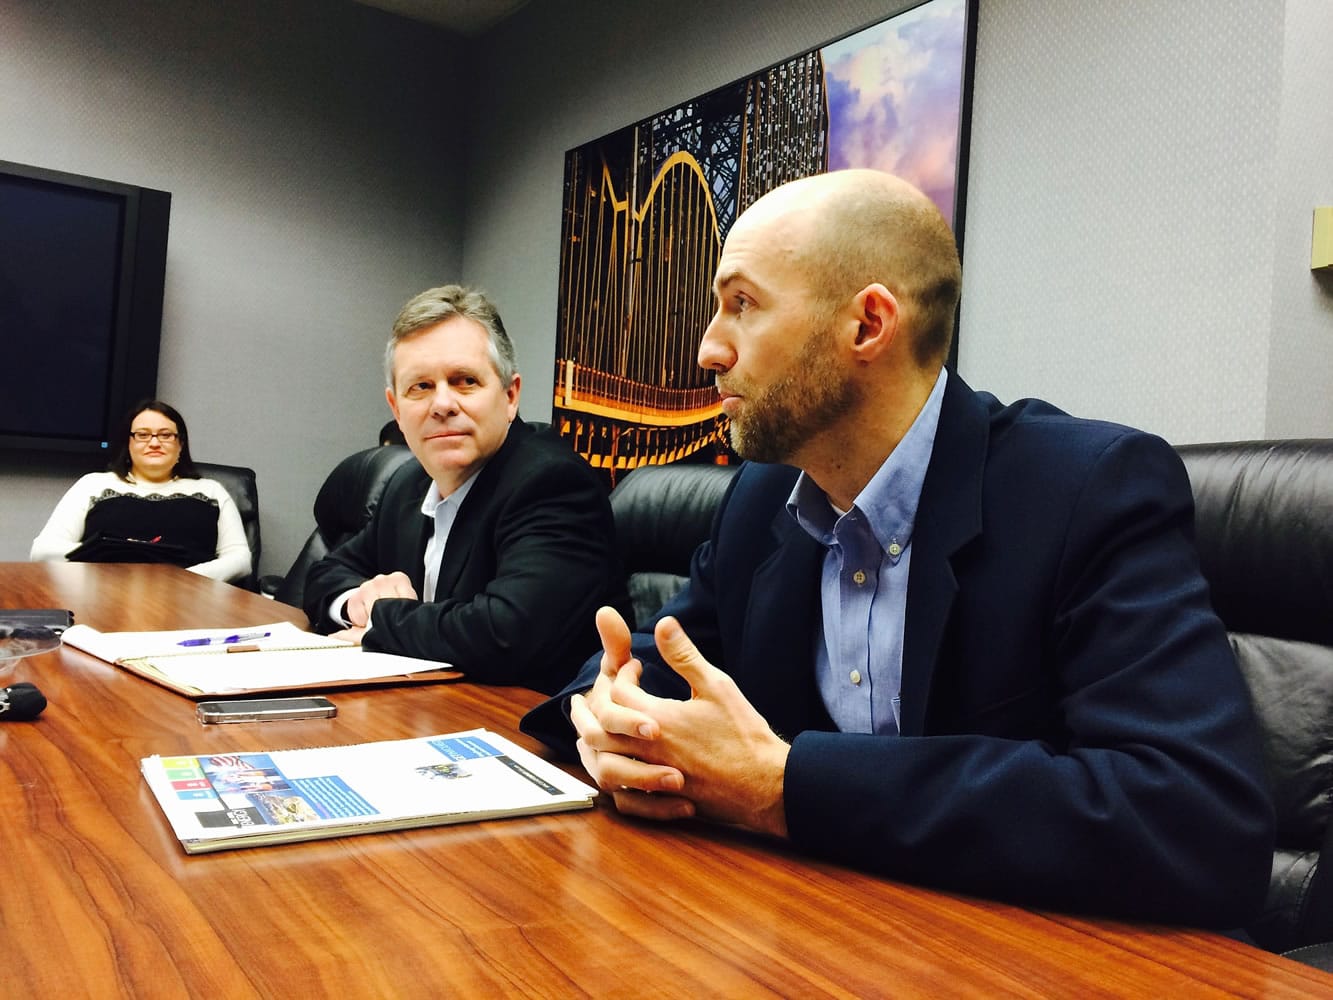 From left, Jennifer Minx, a spokeswoman for Tesoro, Dan Riley, vice president of government affairs for Tesoro, and Jared Larrabee, general manager of Vancouver Energy, visit The Columbian's editorial board.